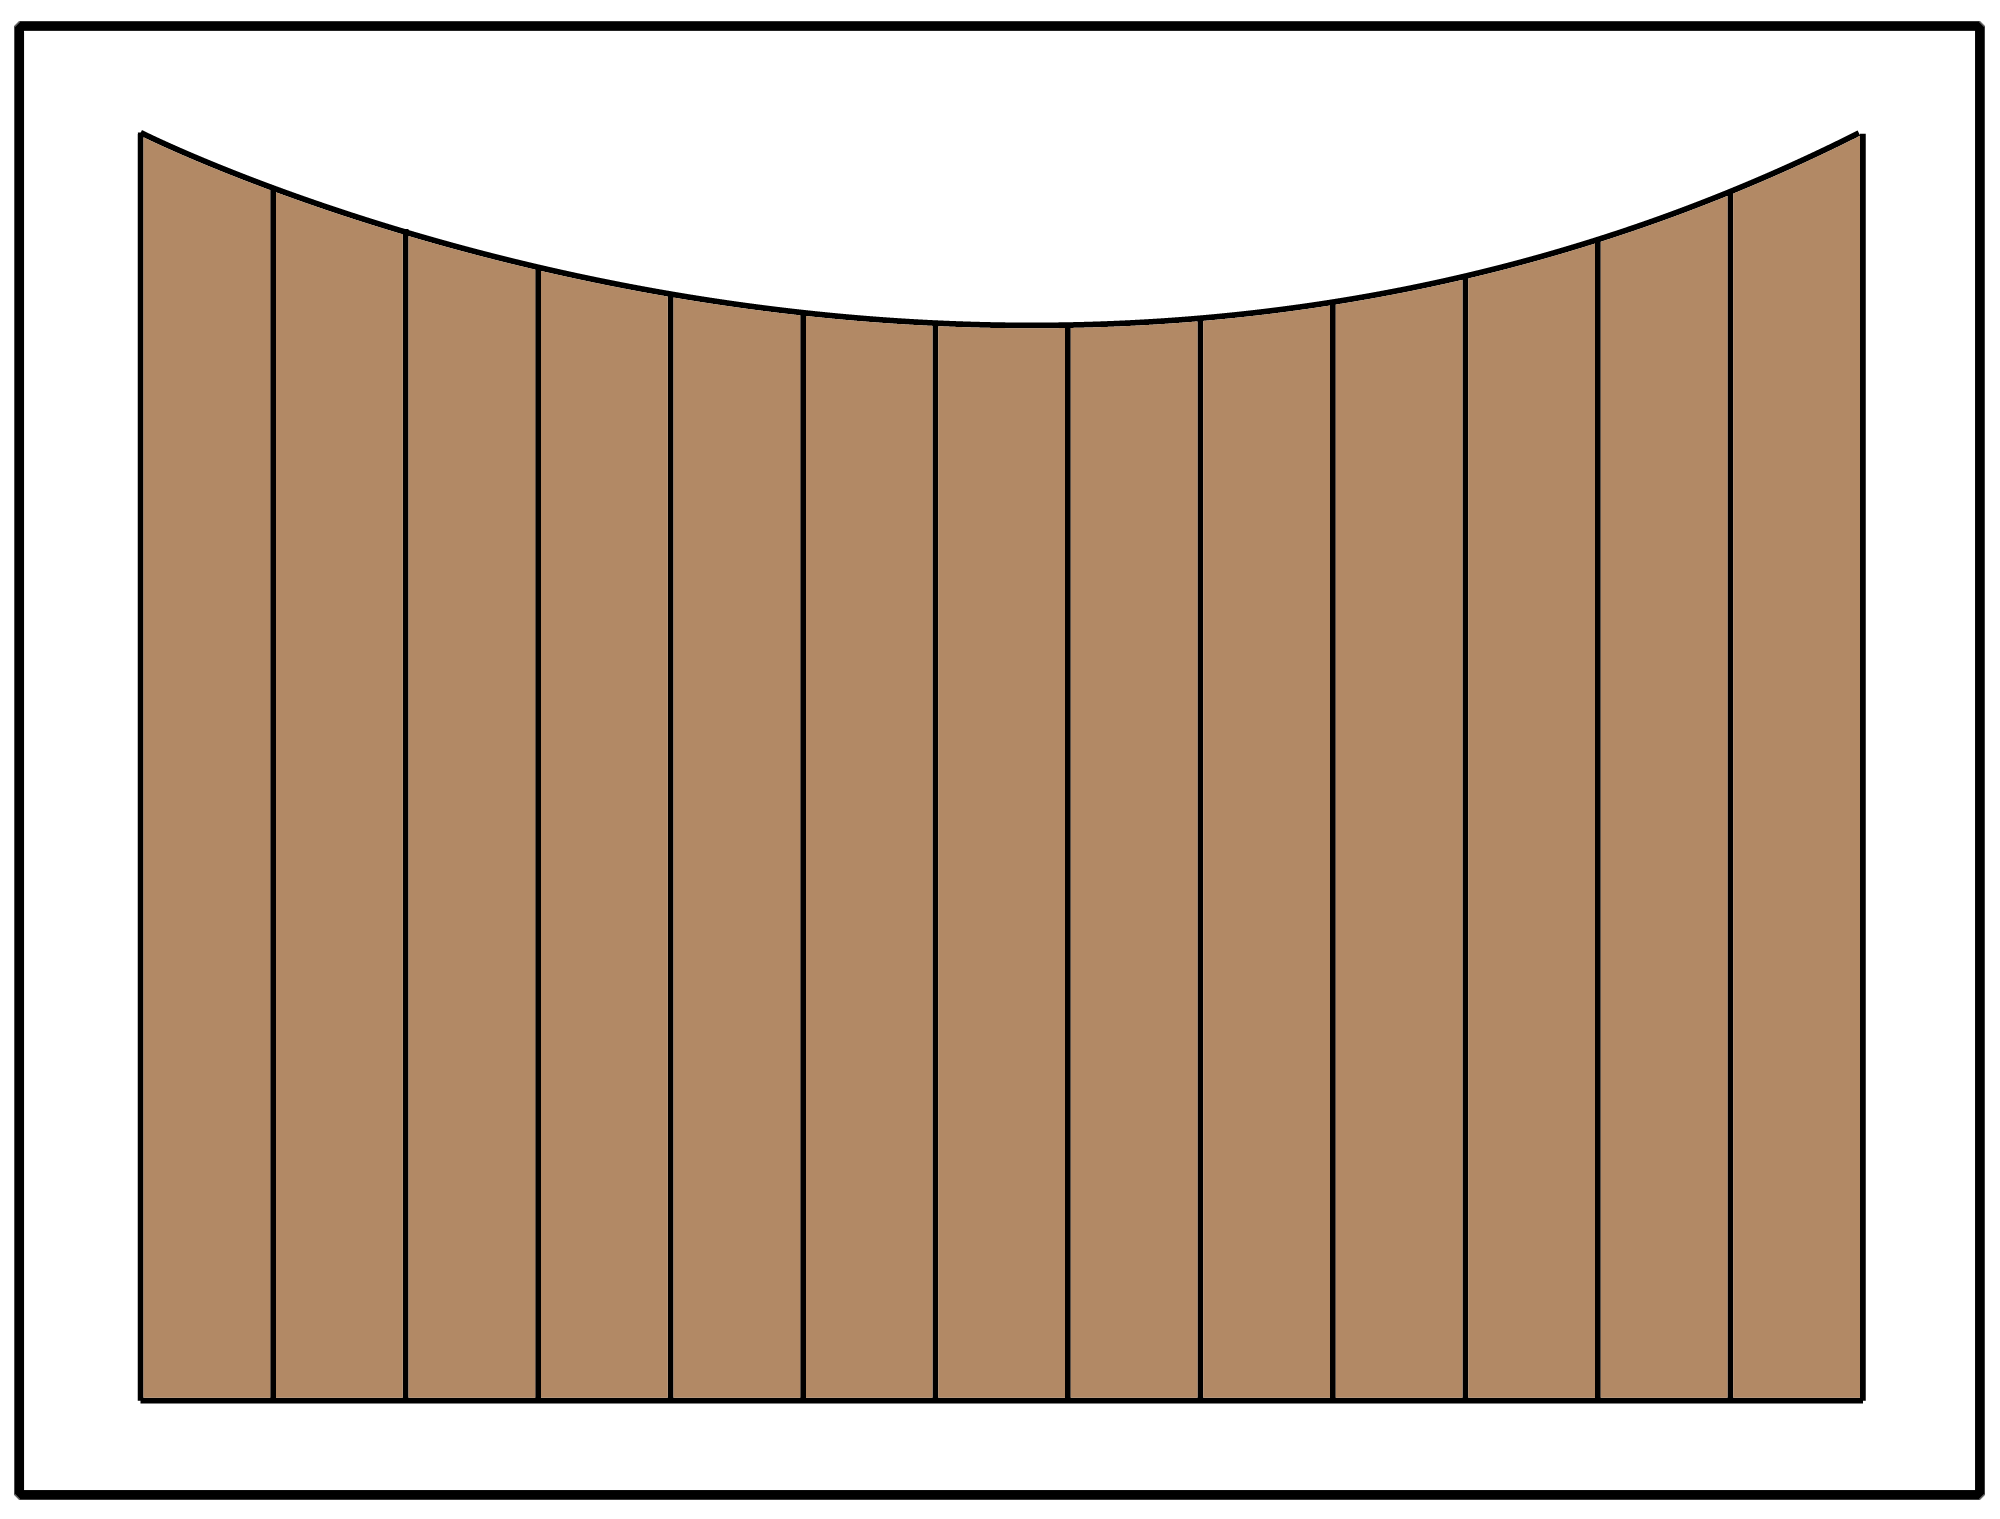 Illustration of a privacy fence with an scalloped curve in the panel